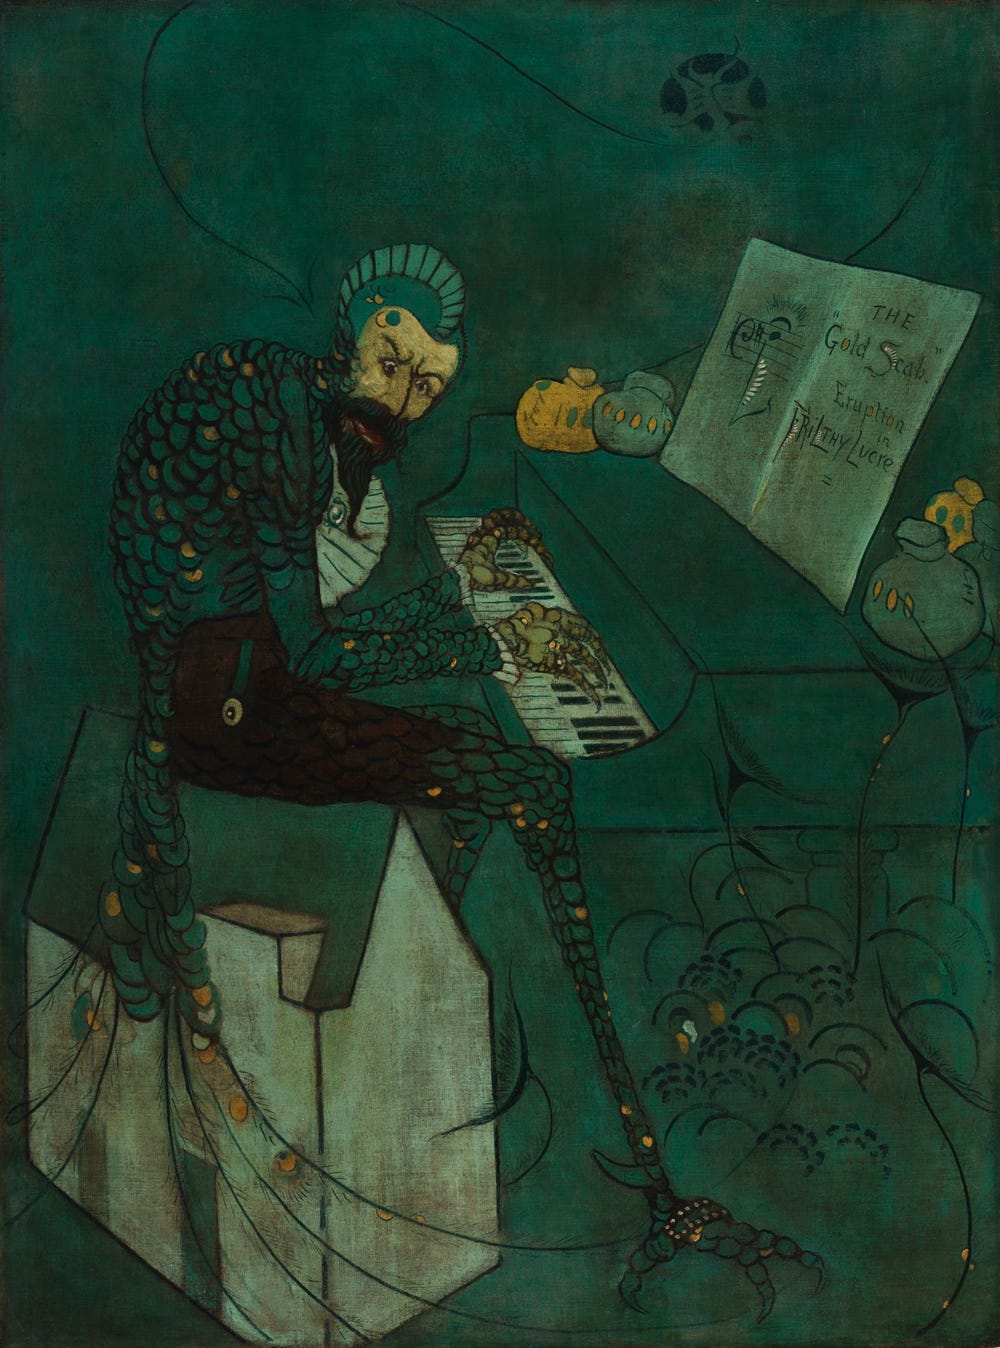 man with fish scales playing the piano